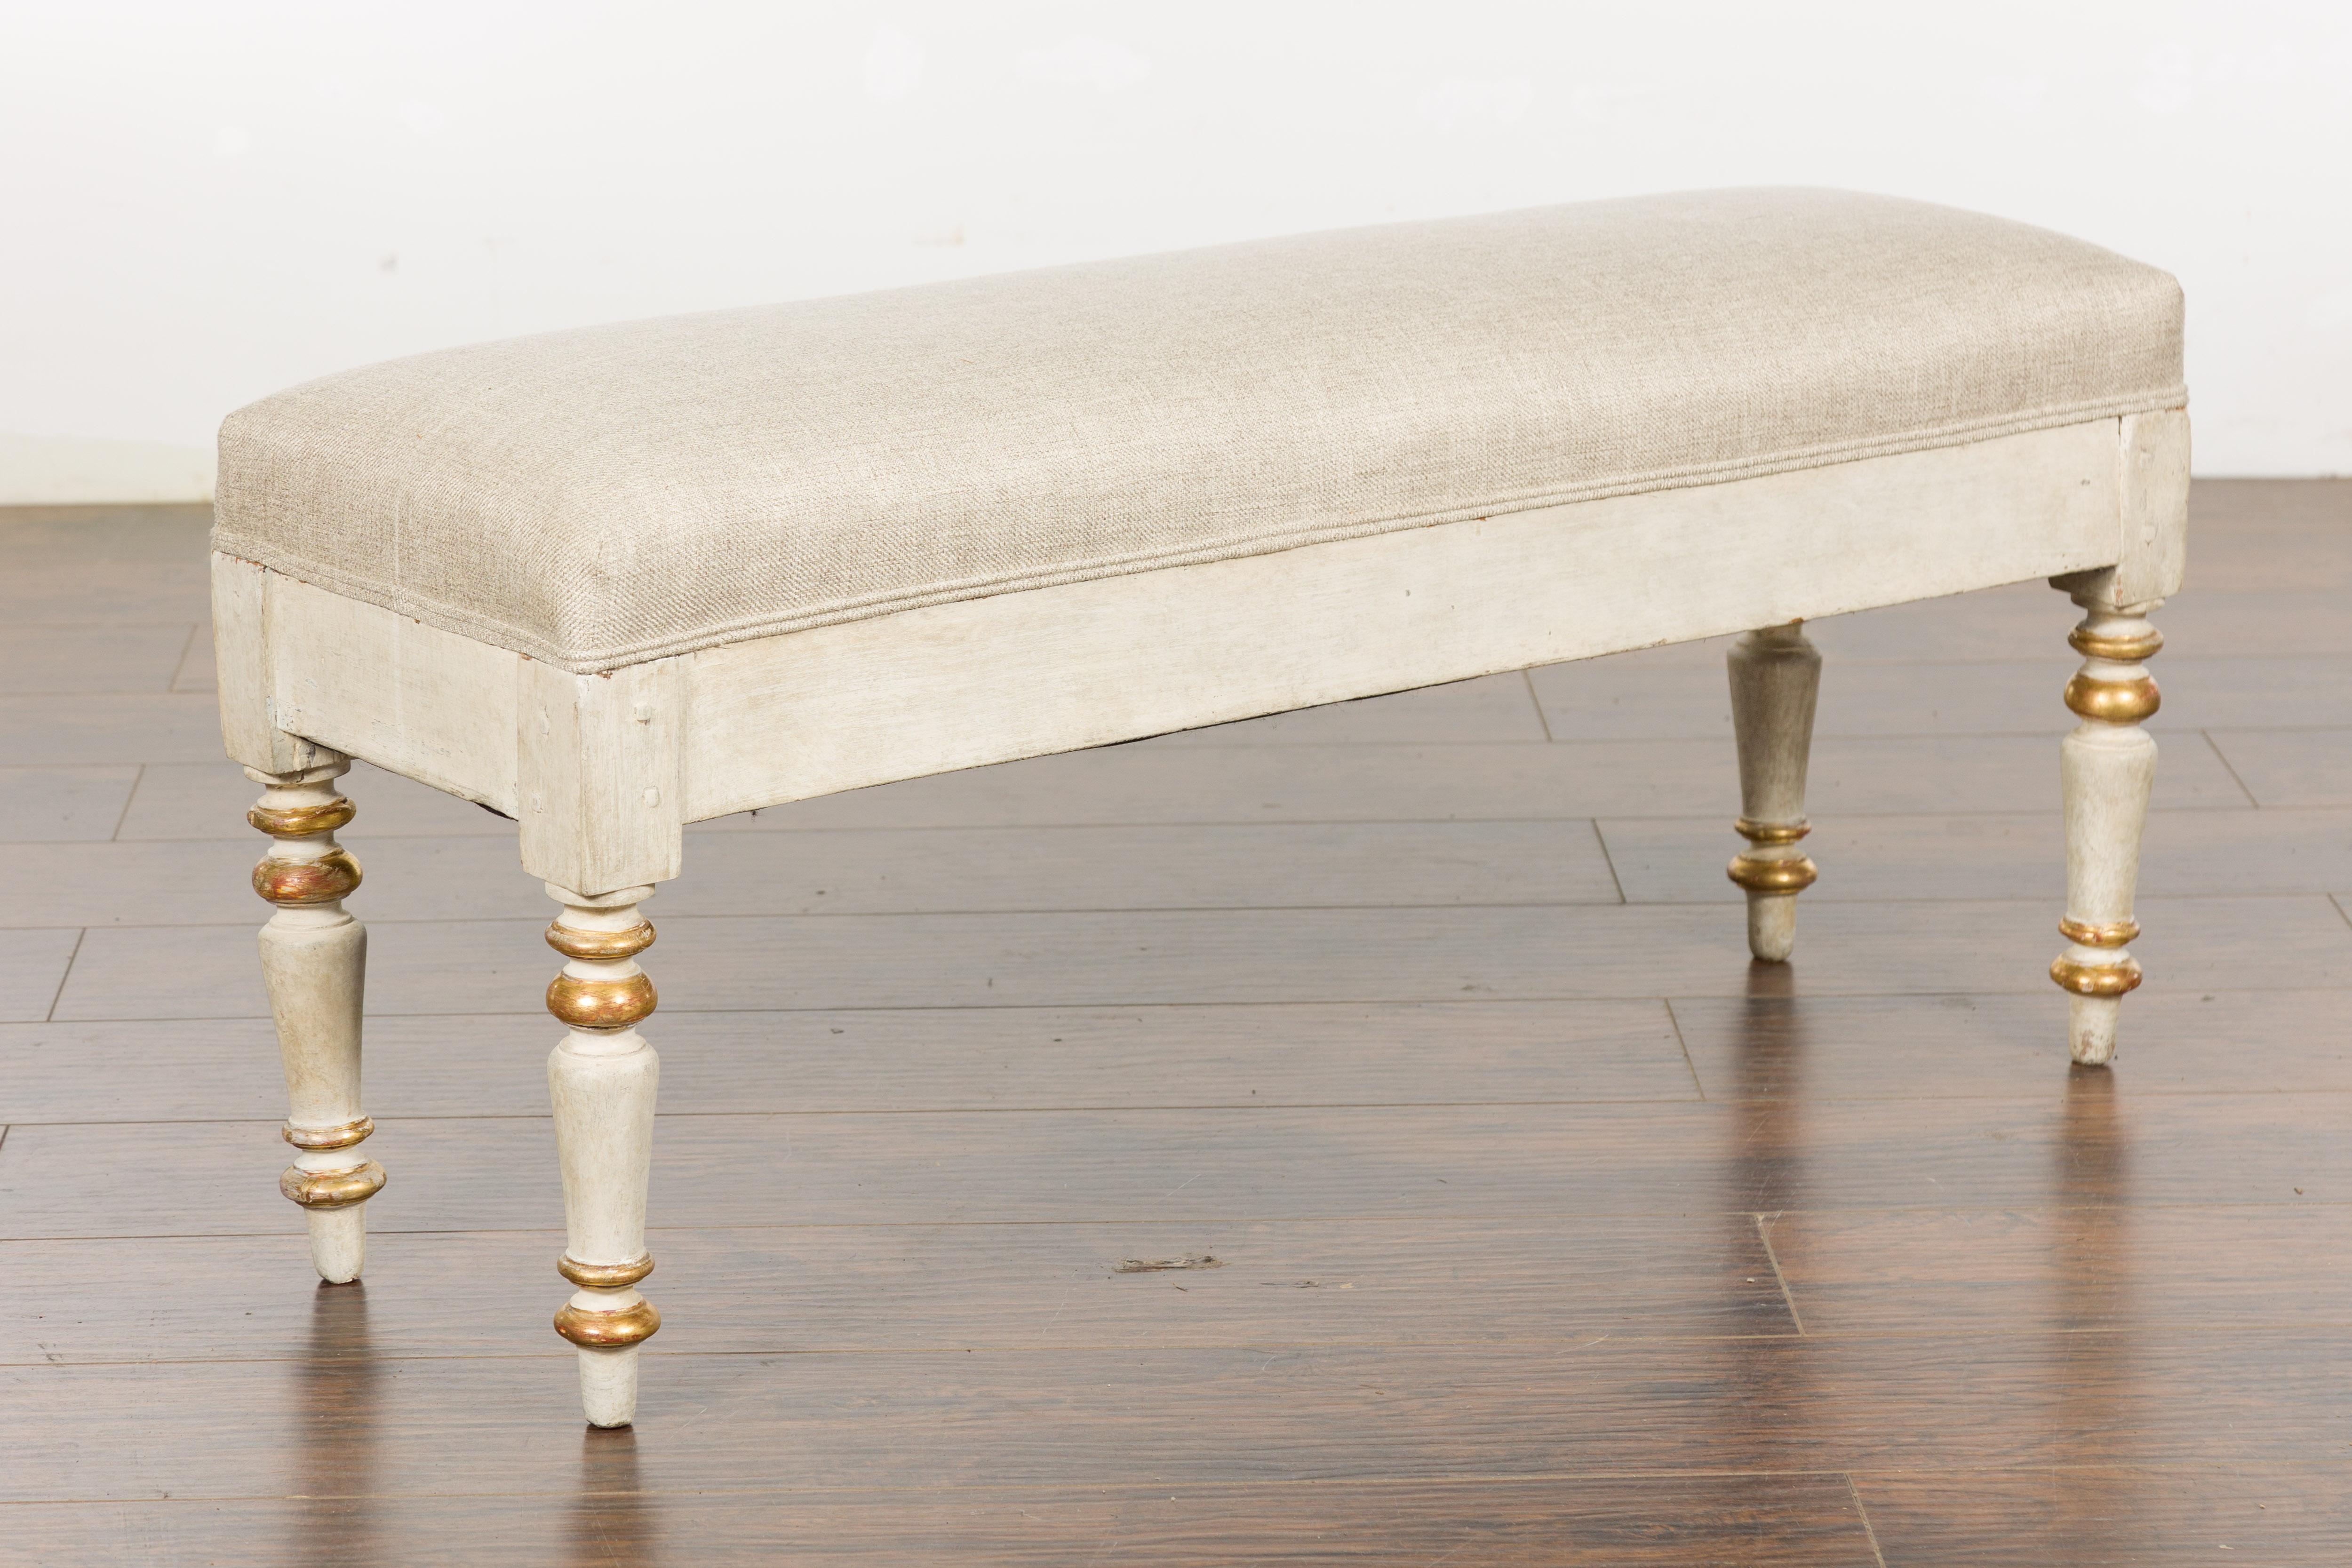 A French painted wood bench from the 19th century with gilt accentuation, turned legs and new linen upholstery. This exquisite French painted wood bench from the 19th century exudes classic elegance, bringing a touch of historic charm to any space.